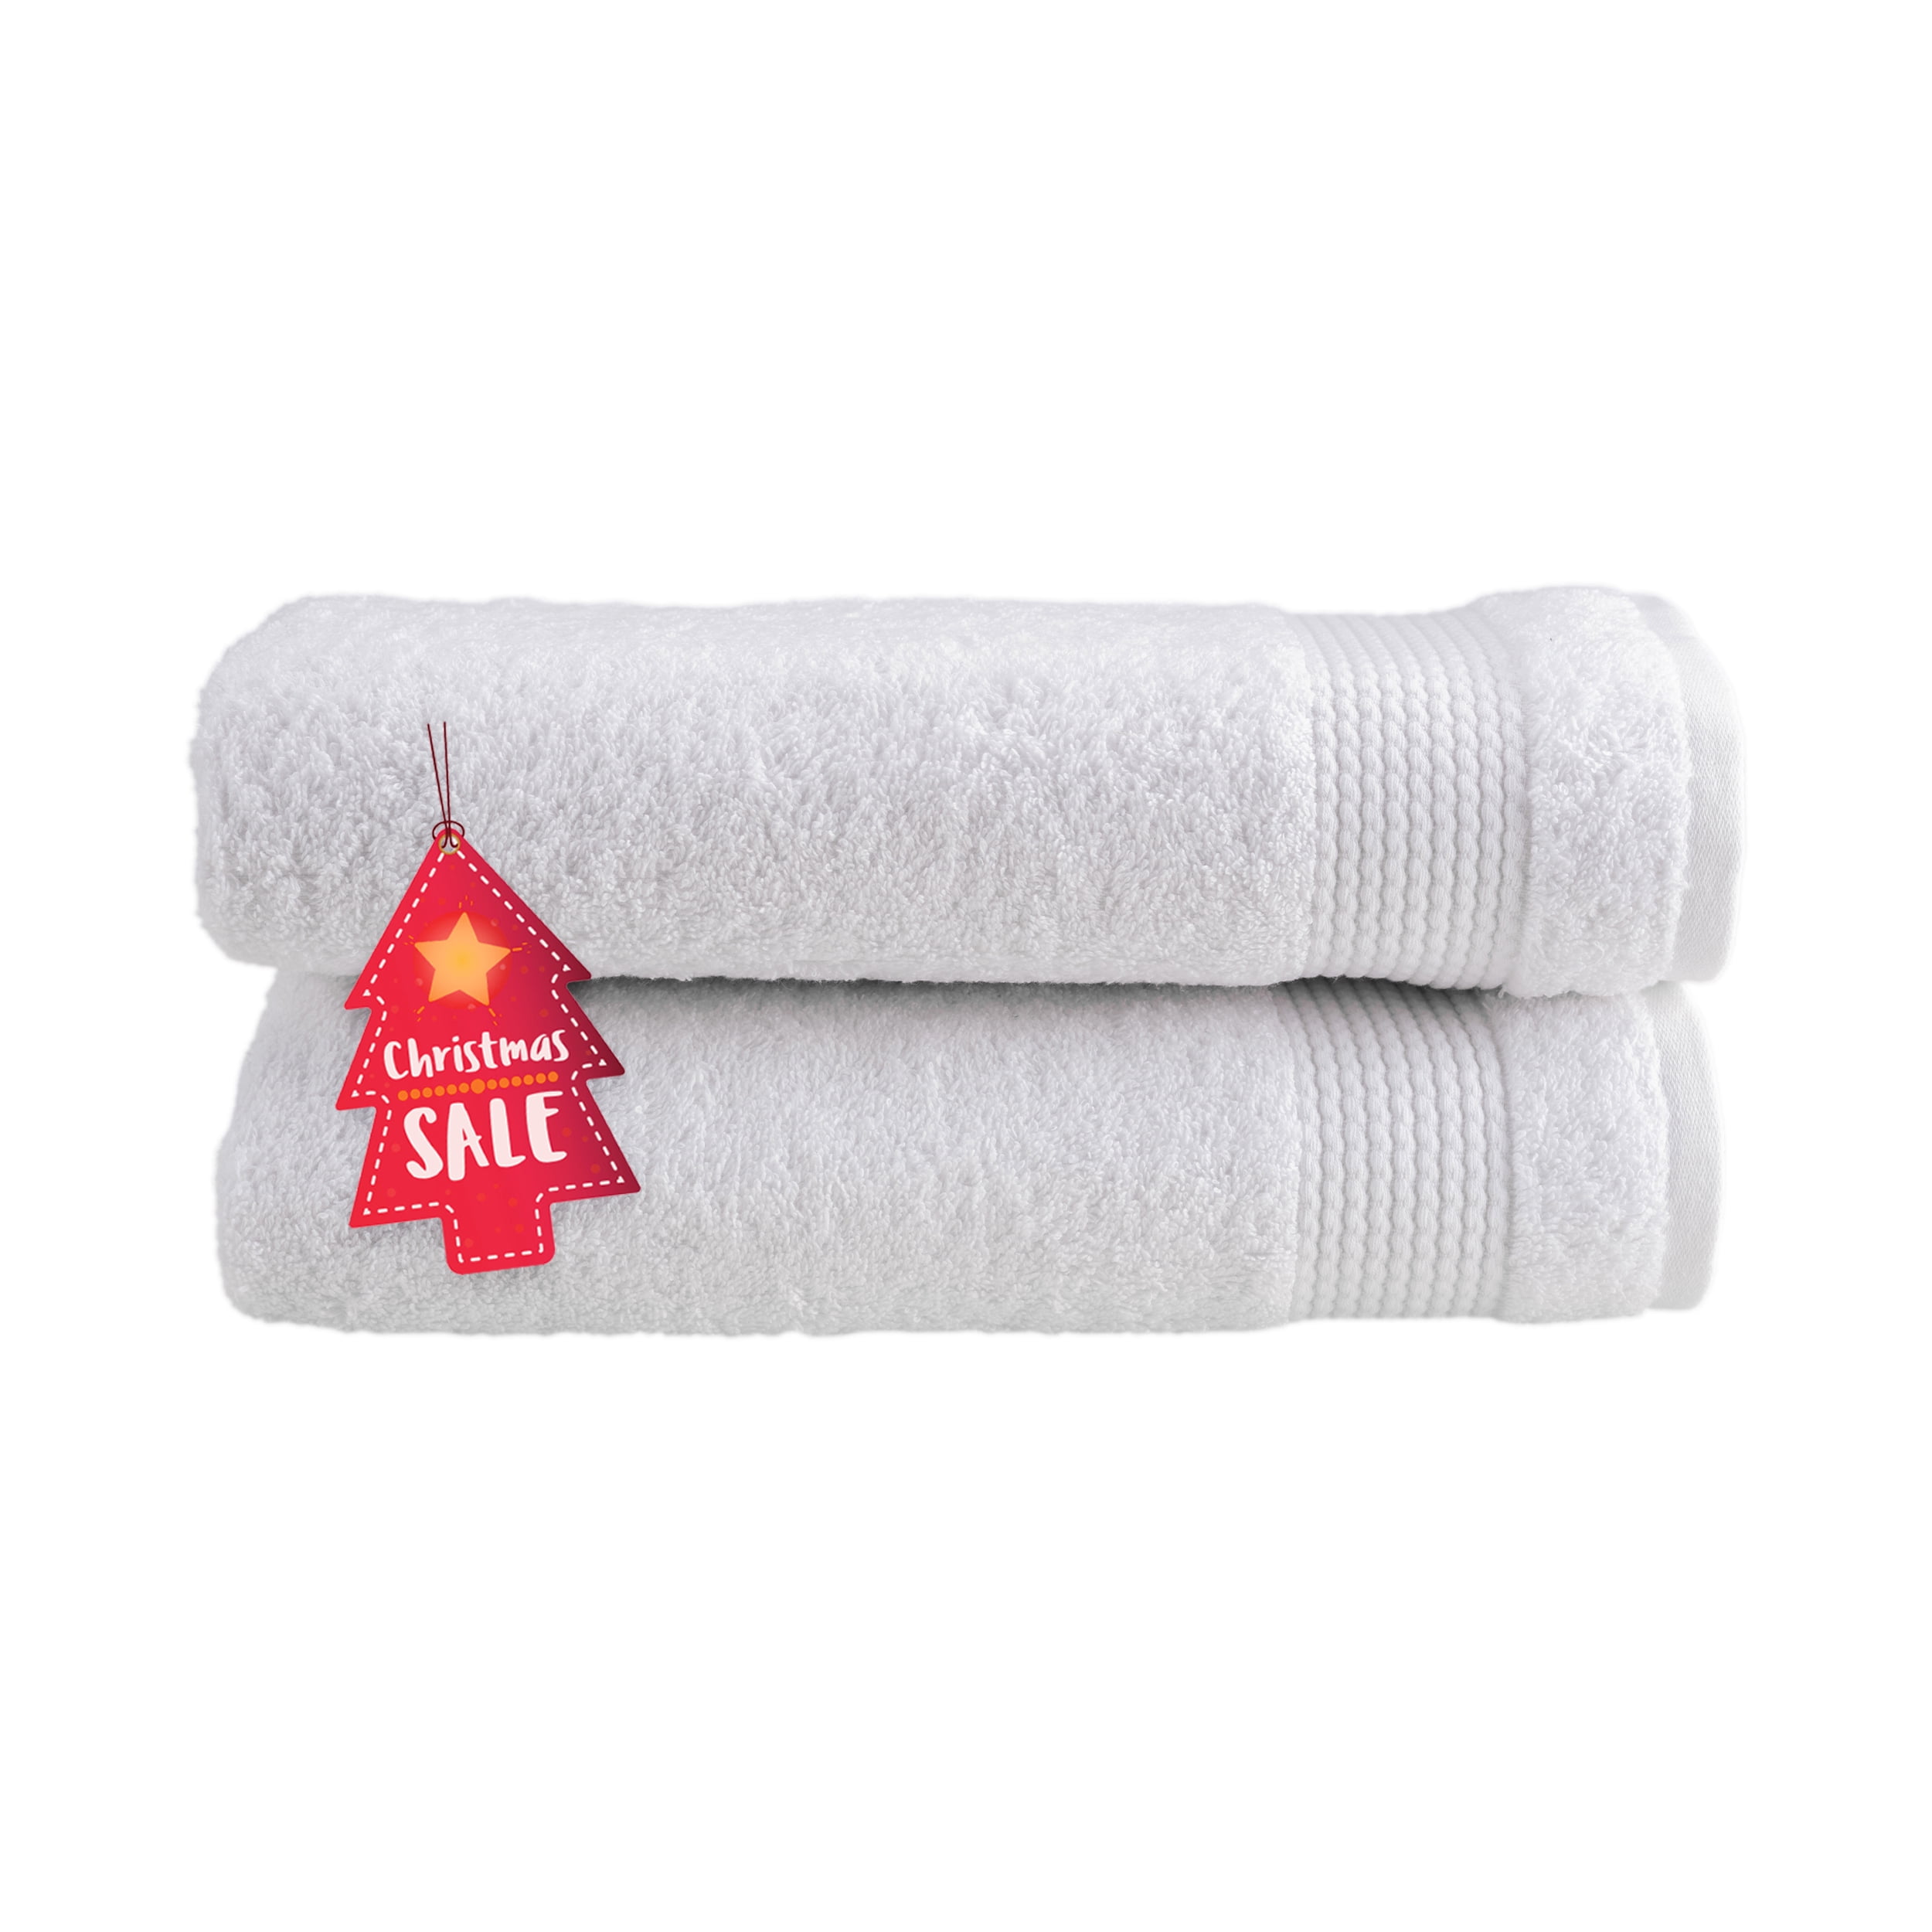 Quality Turkish Towels & Hooded Towels